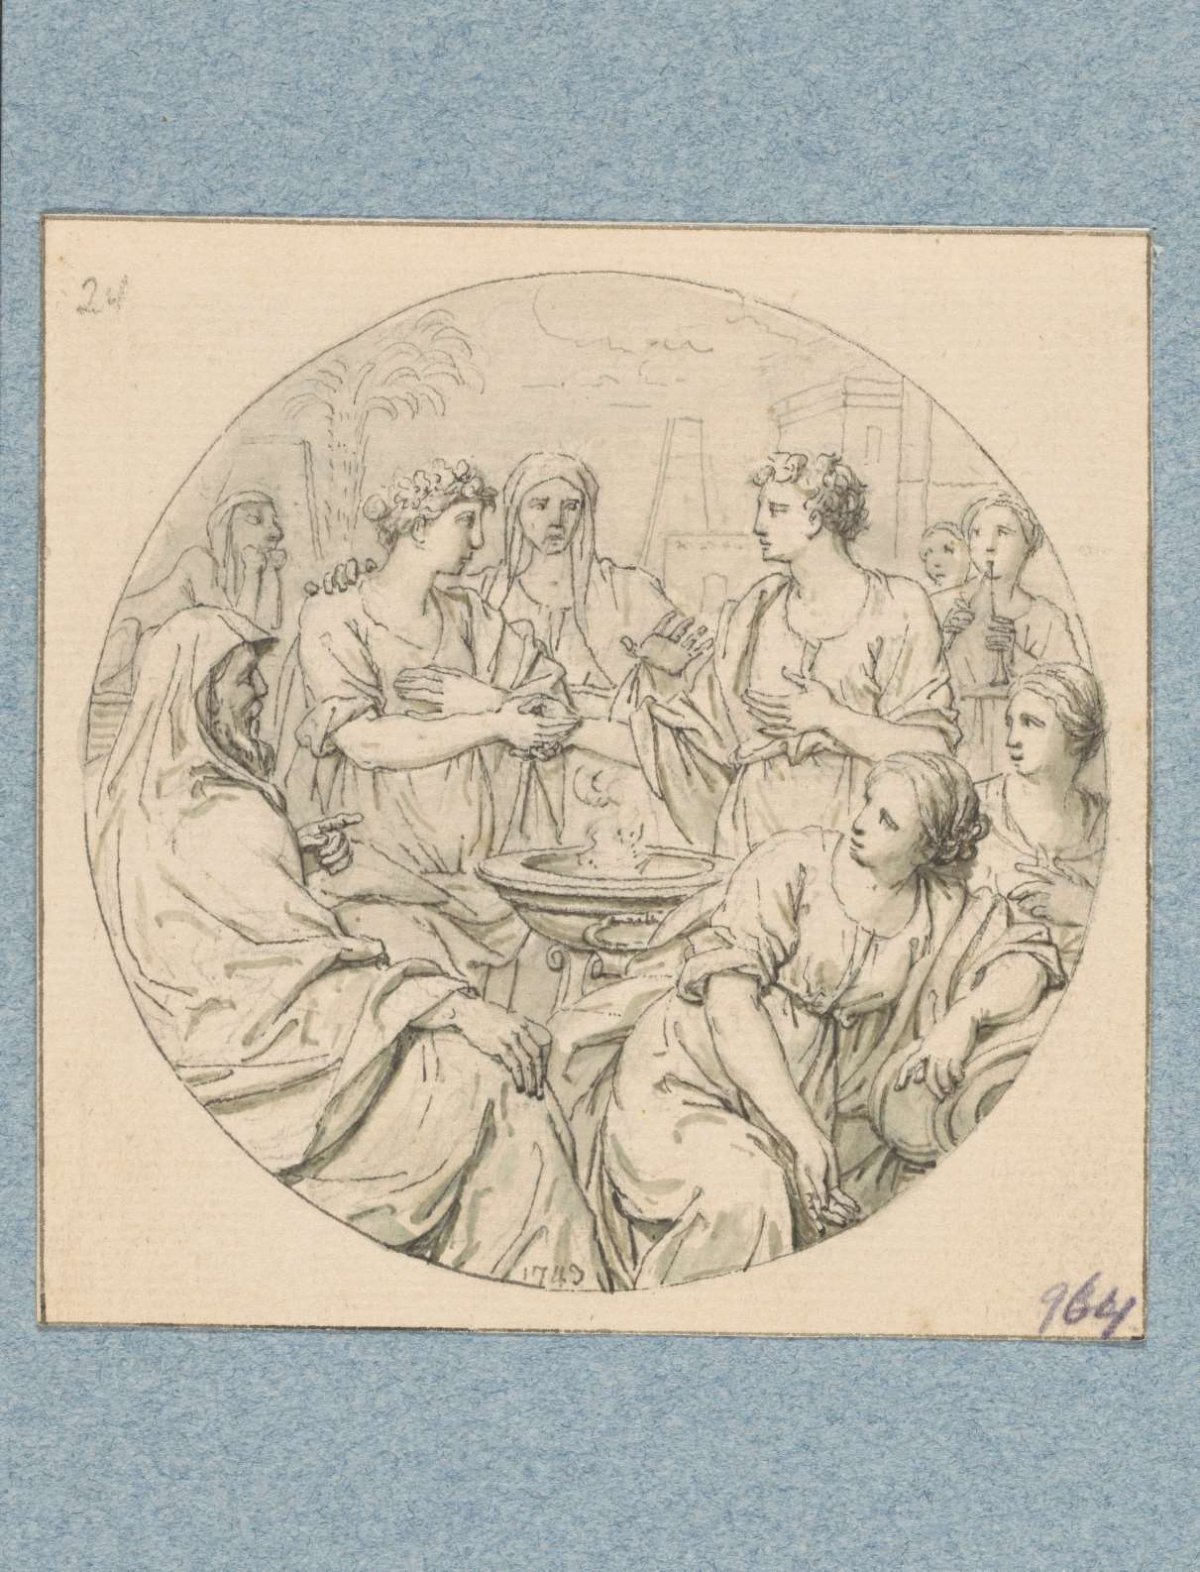 A Roman marriage (in box with 43 drawings), Louis Fabritius Dubourg, 1743